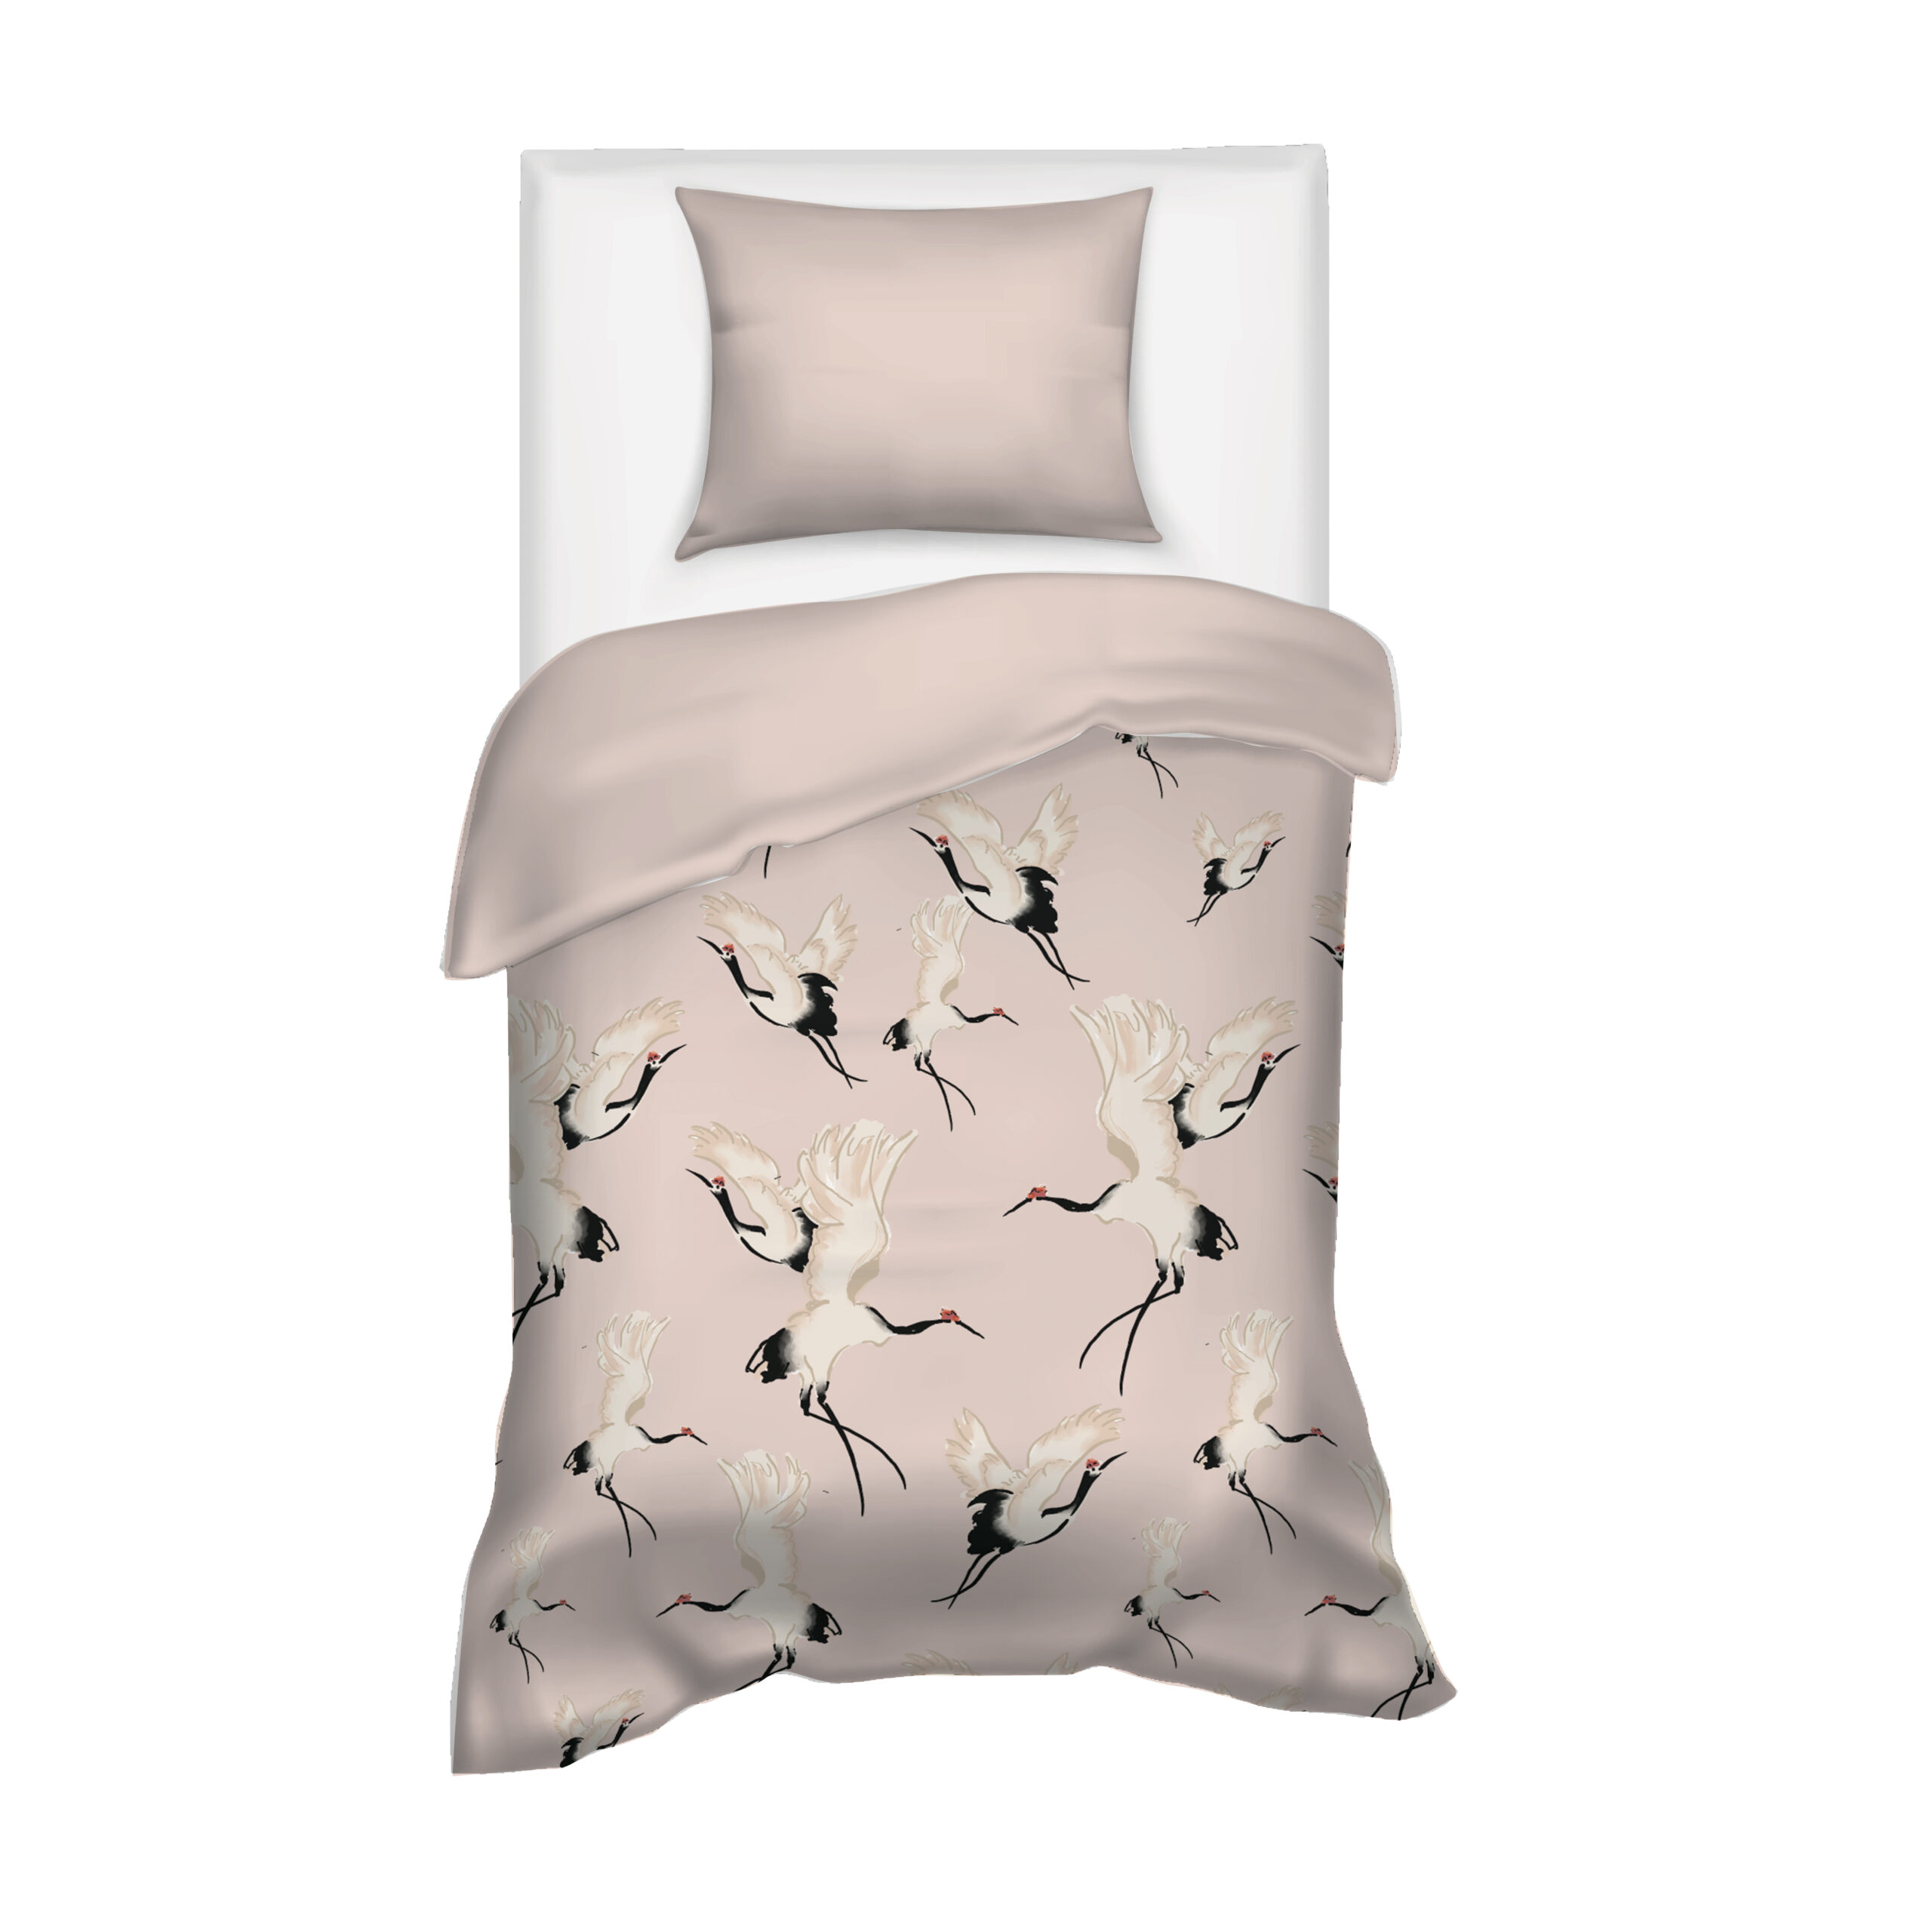 Villa Madelief 140 x 200cm Pink White Cranes Printed Duvet Cover with 1 Pillowcase